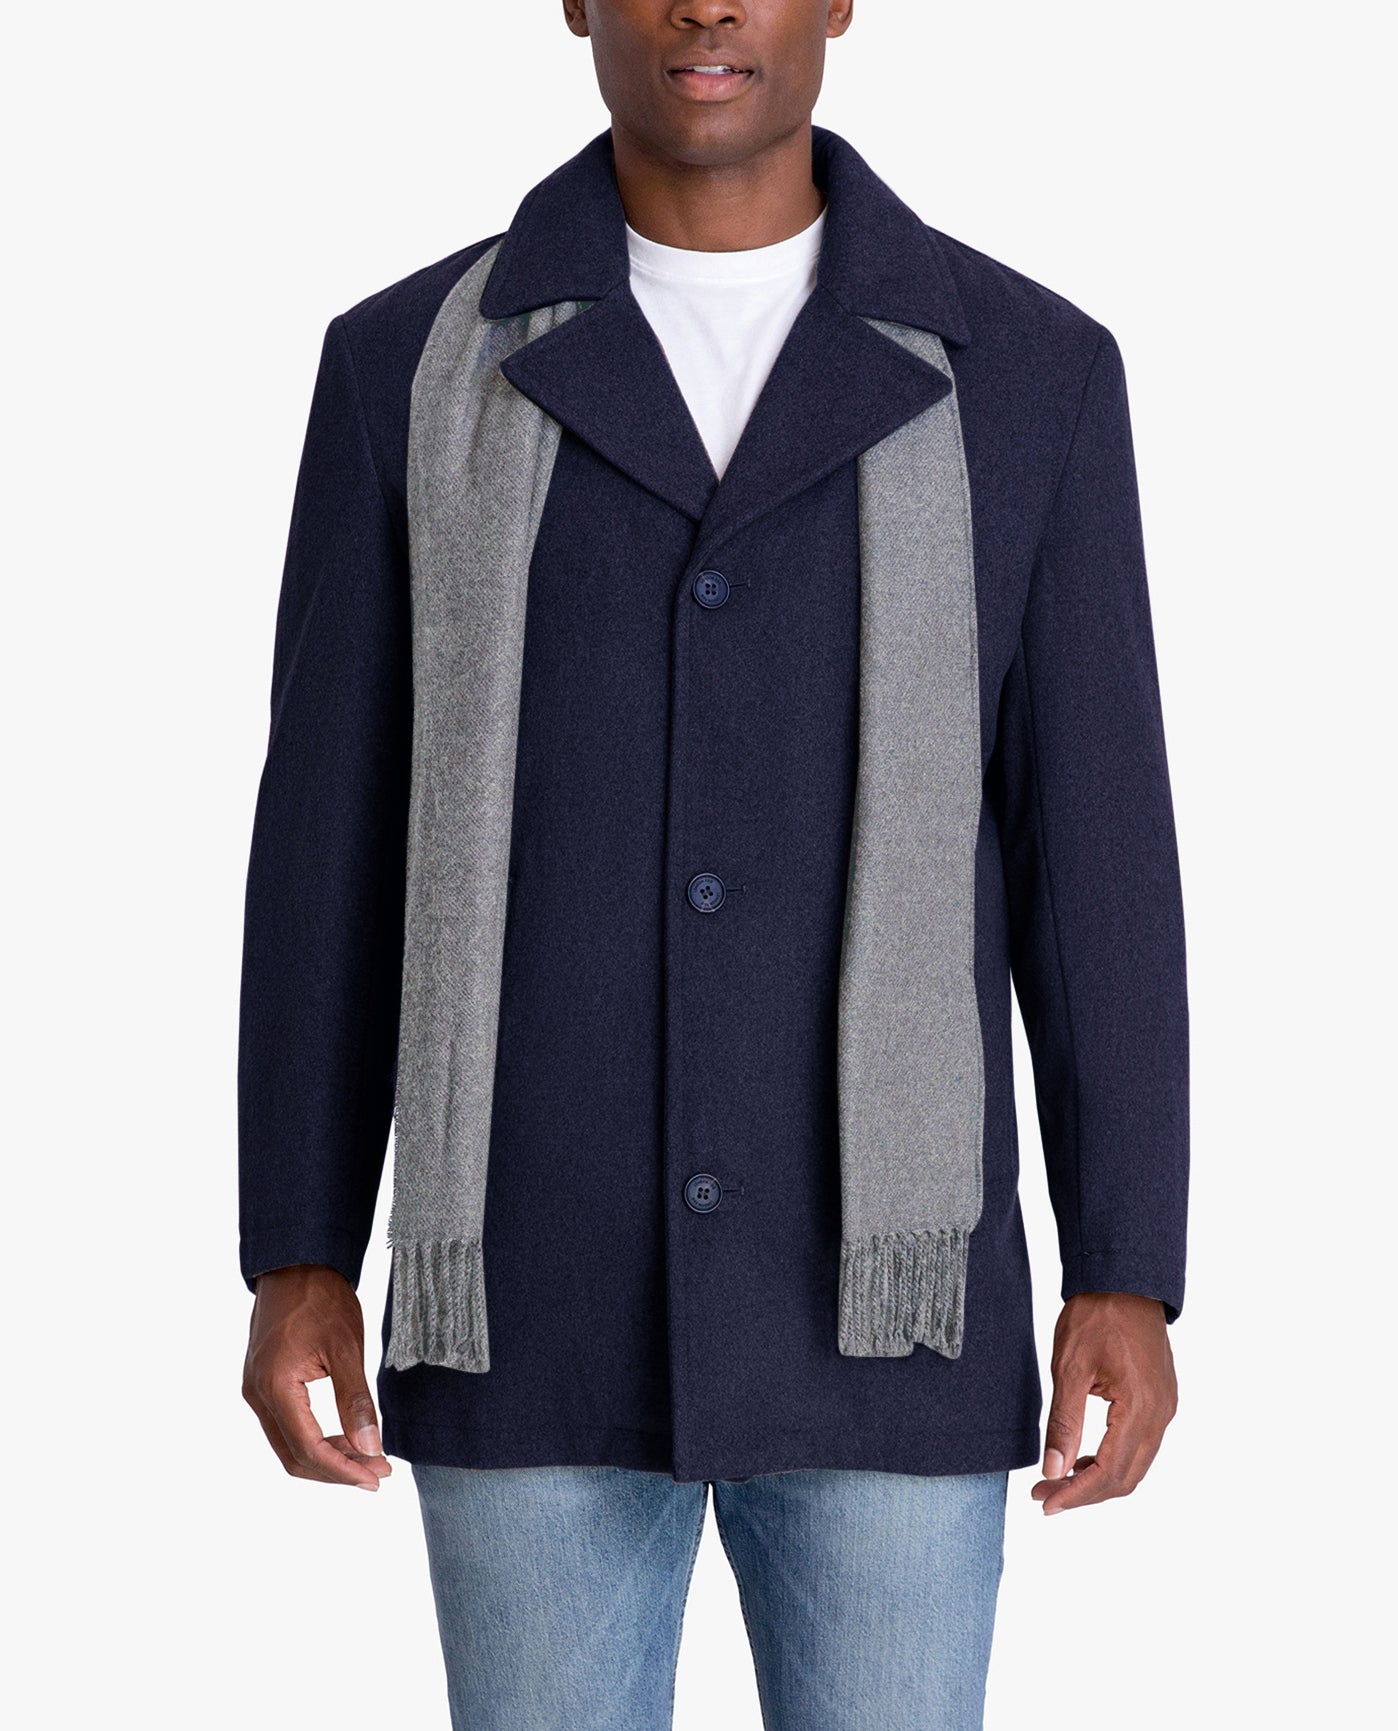 FRONT VIEW OF AMITY SINGLE BREASTED WOOL JACKET | NAVY HEATHER